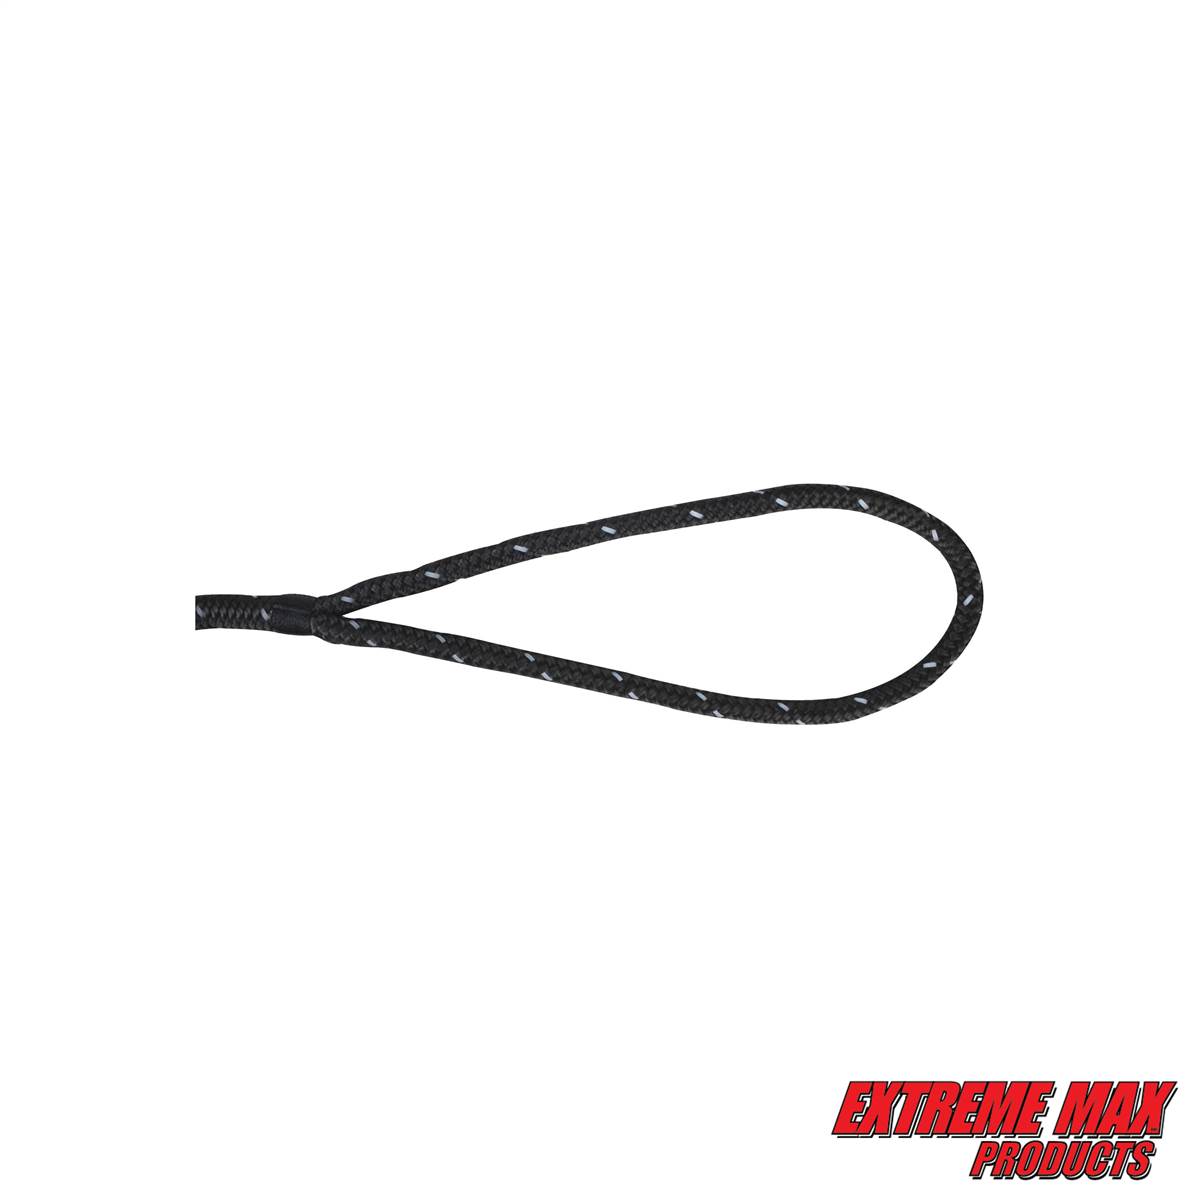 Extreme Max 3006.3033 BoatTector Double Braid Nylon Dock Line Value 4 ...